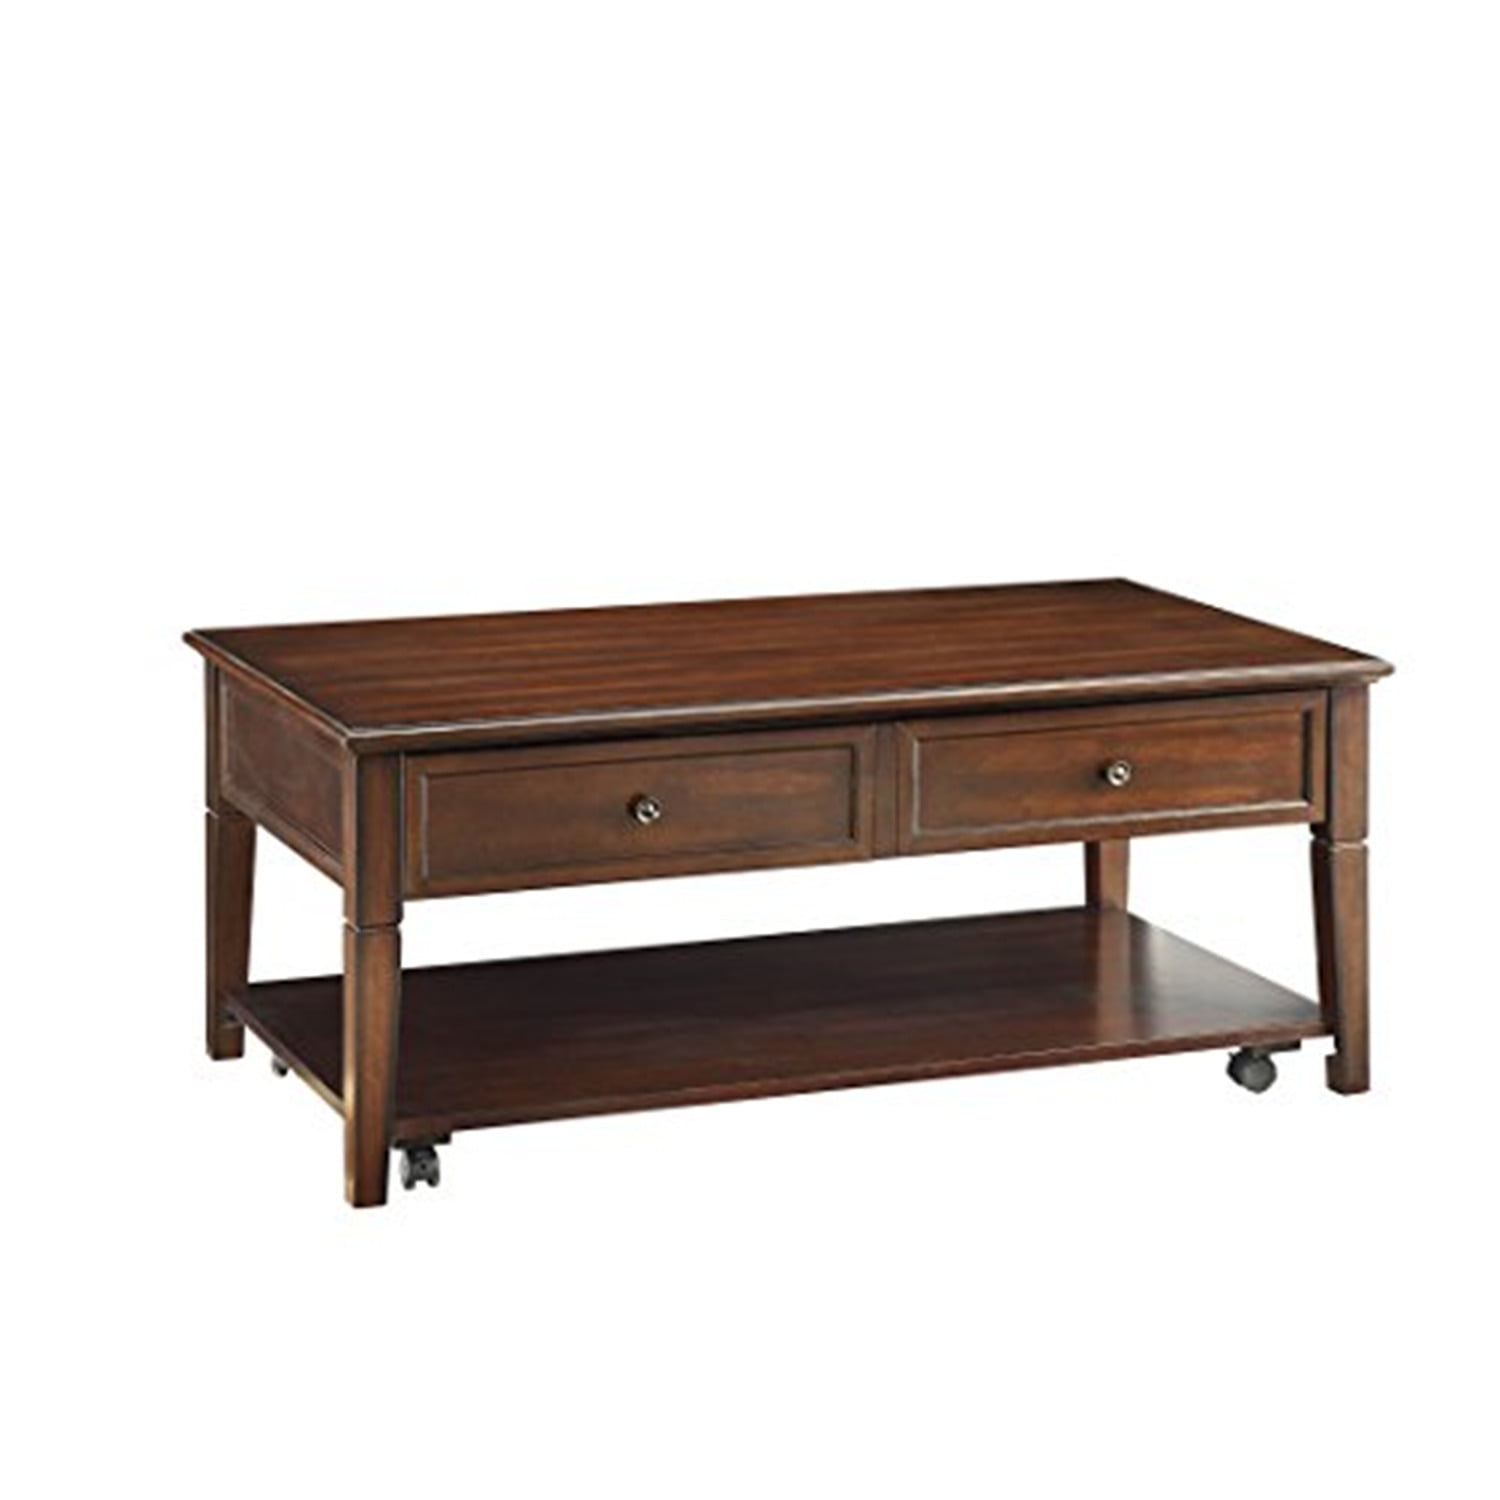 Picture of ACME 80254 Rectangular Malachi Coffee Table with Lift Top - Walnut - 20 x 48 x 26 in.